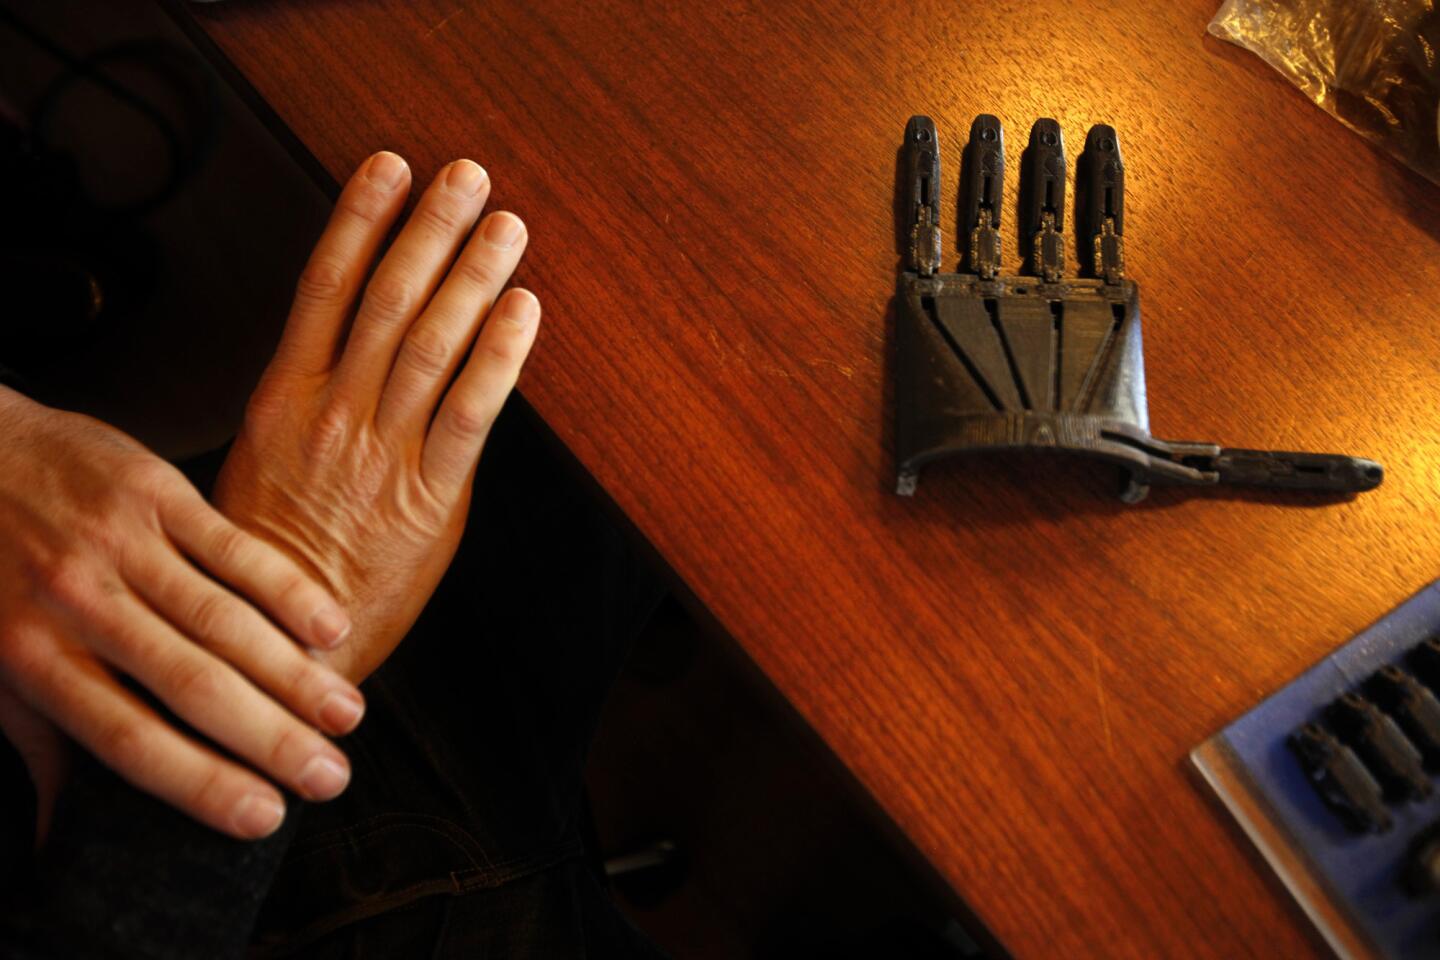 Mick Ebeling, founder and chief executive of Not Impossible, rests his hands next to a prosthetic hand he created with a 3-D printer at his office in Venice. Besides making prostheses, the group developed EyeWriter, a pair of glasses affixed to a Web camera that enables people to draw on a computer with their eye movements.